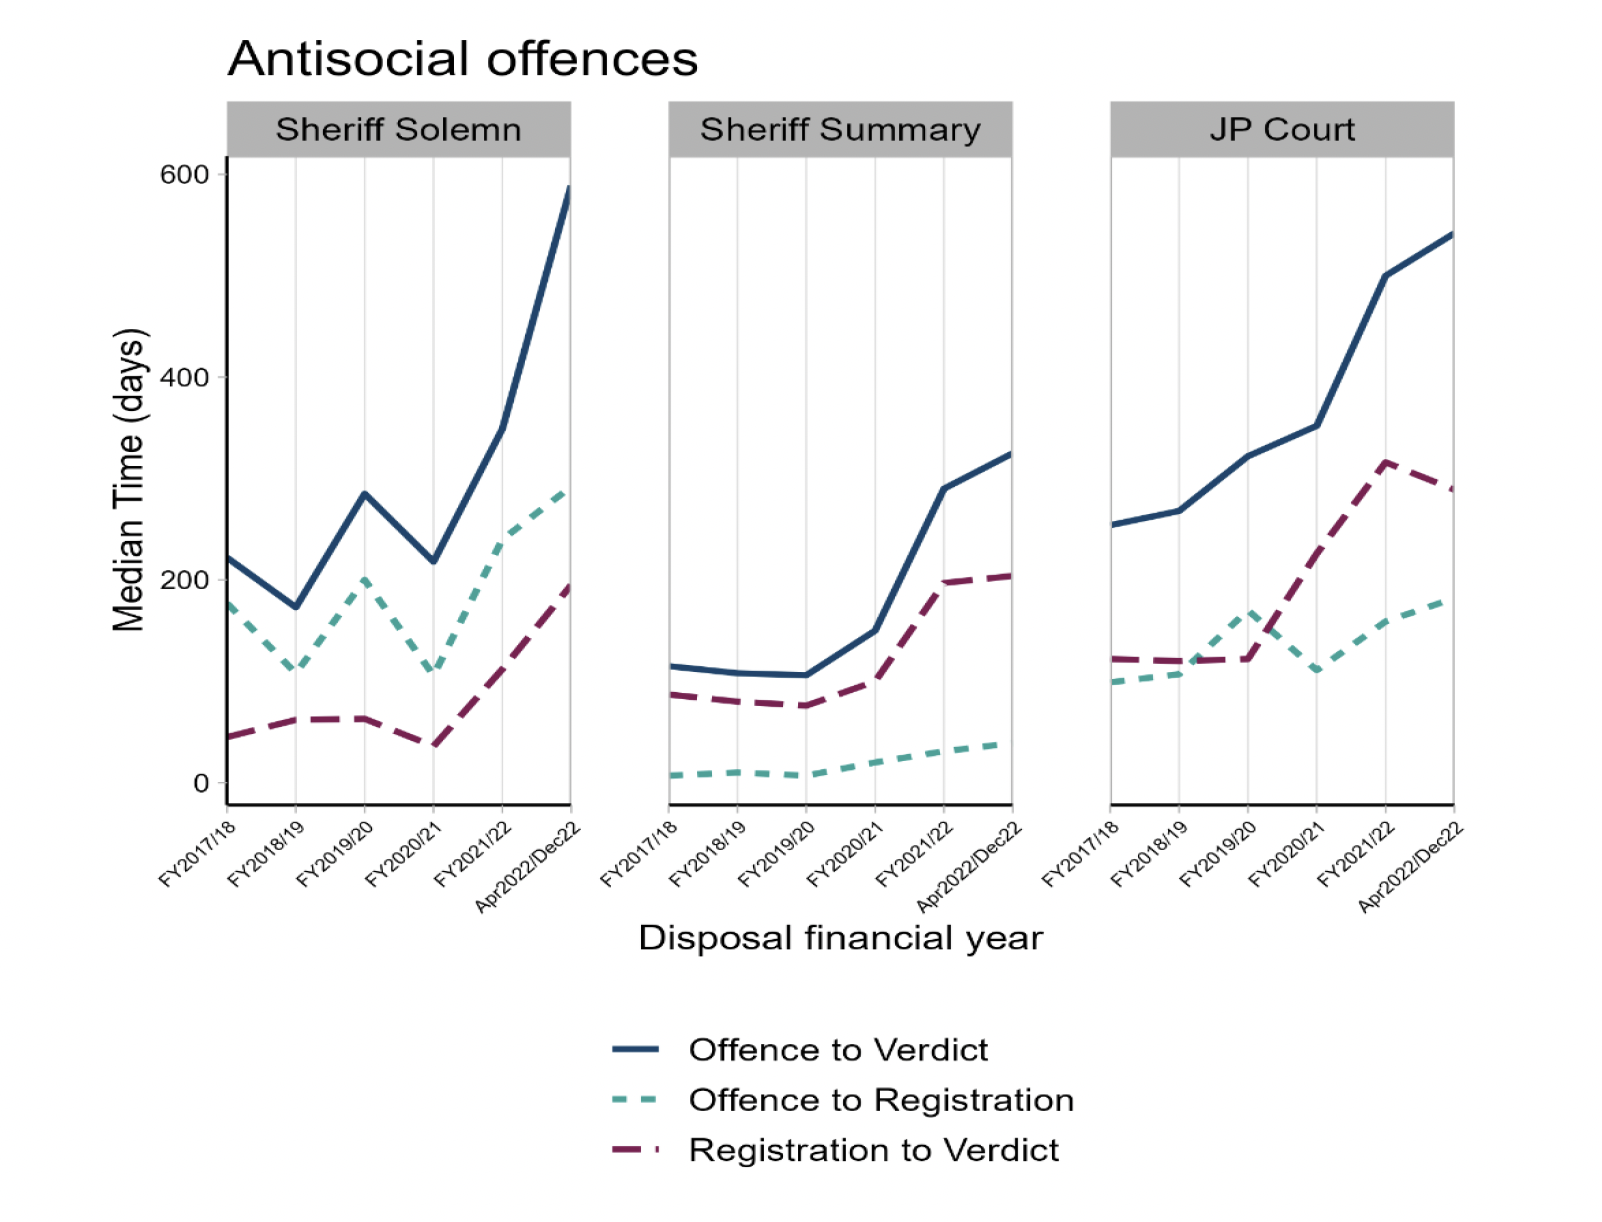 Figure 13: Three line charts showing offence to verdict, offence to registration and registration to verdict median times for accused with antisocial offences in Sheriff Solemn, Sheriff Summary and JP Court showing that all times have increased since the beginning of COVID-19 pandemic.